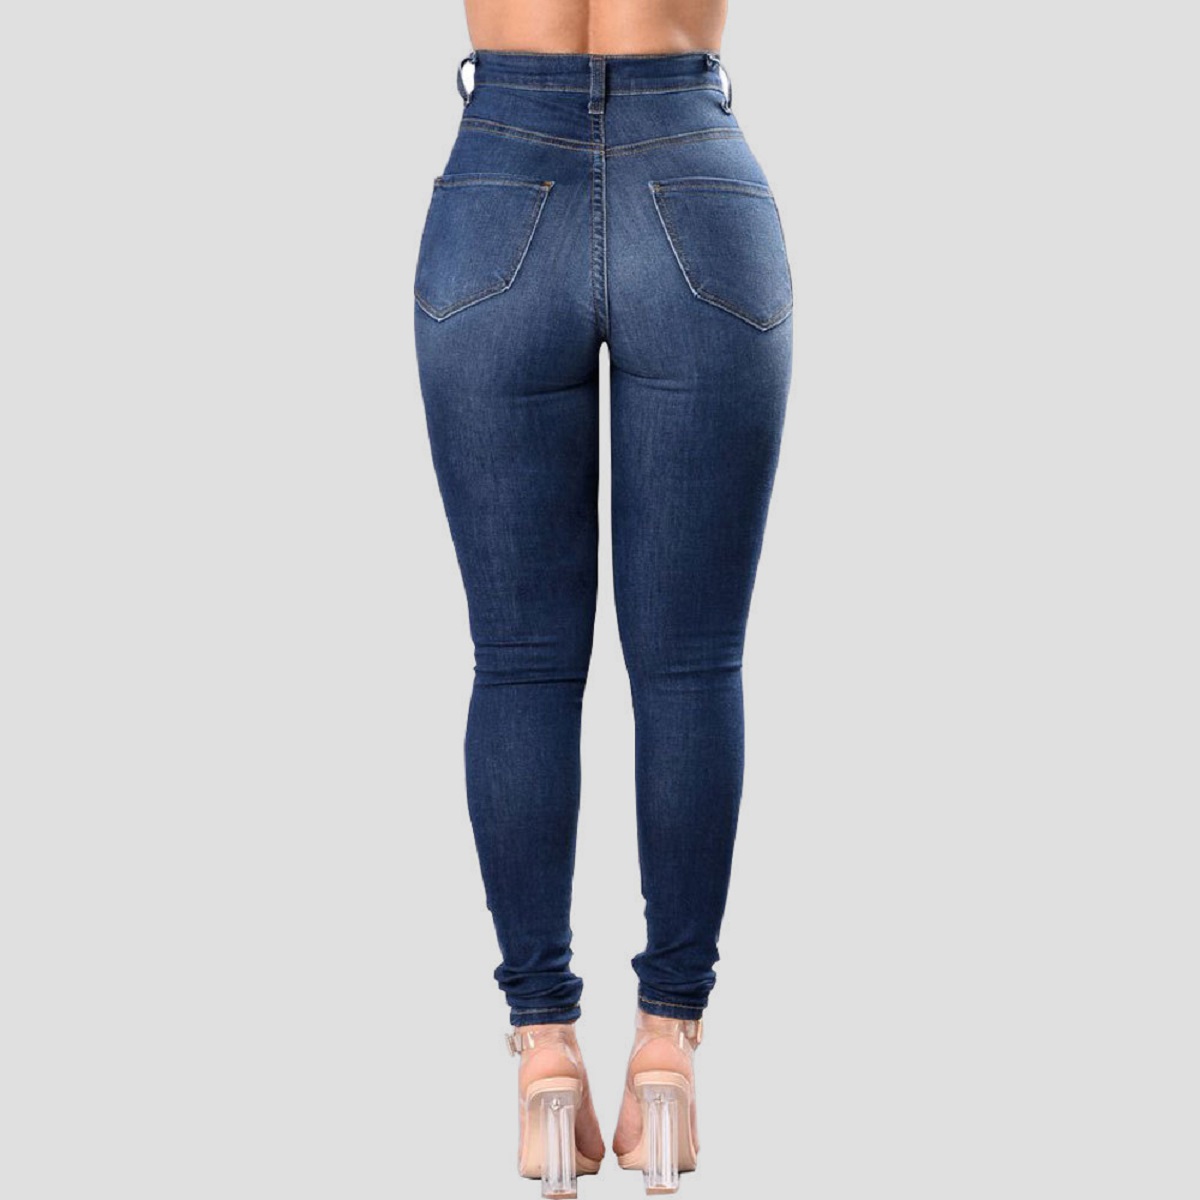 High Rise Tight Fitting Distressed Jeans, Blue Jeans ripped stretch denim tight fit 